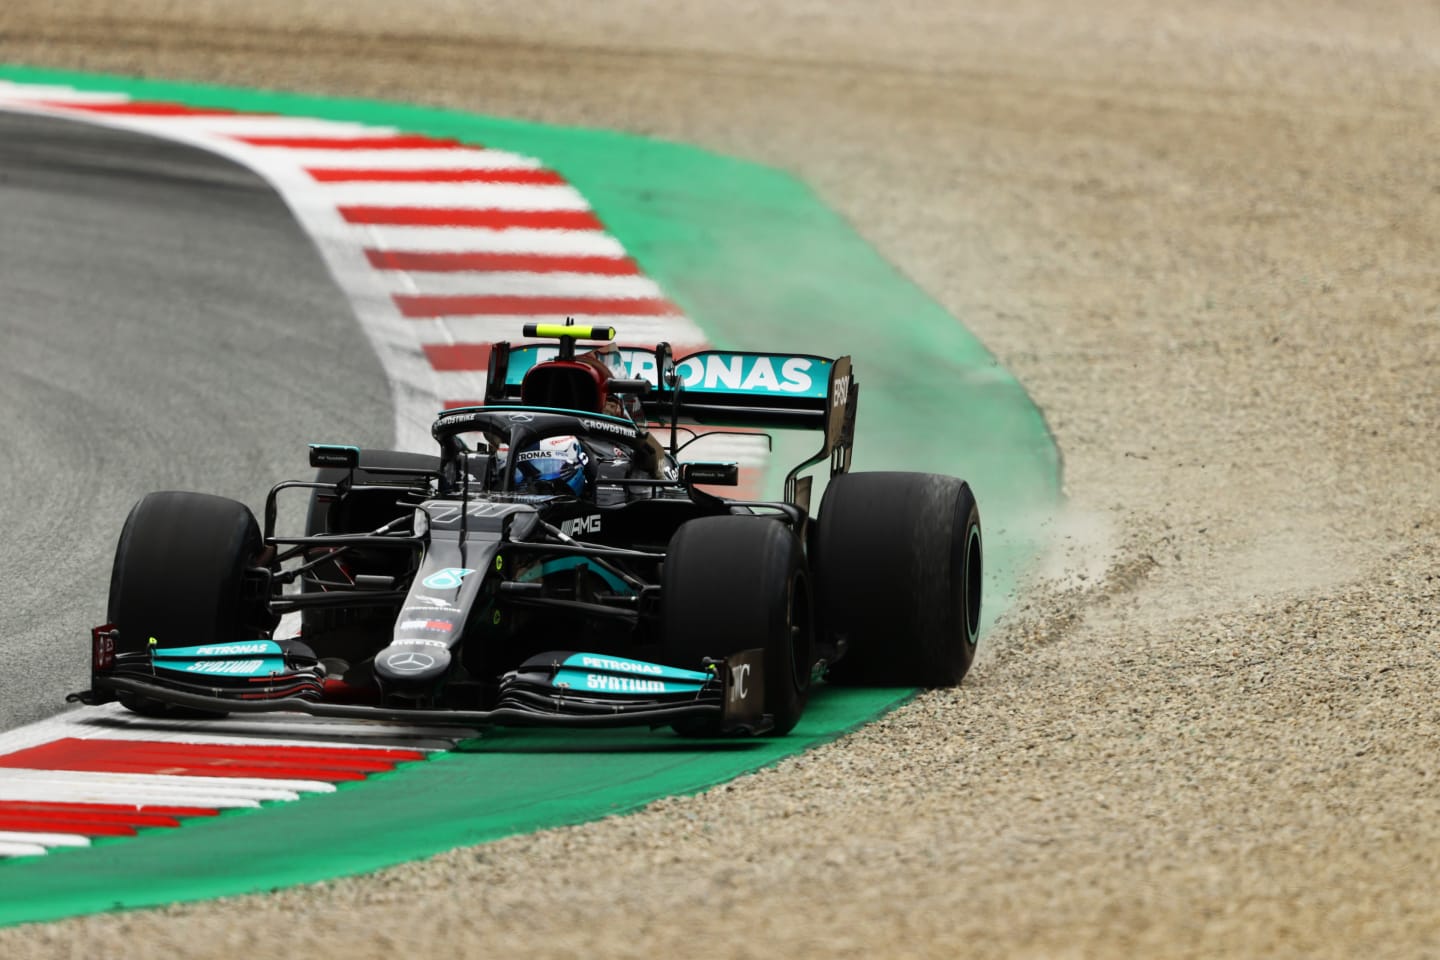 SPIELBERG, AUSTRIA - JULY 02: Valtteri Bottas of Finland driving the (77) Mercedes AMG Petronas F1 Team Mercedes W12 during practice ahead of the F1 Grand Prix of Austria at Red Bull Ring on July 02, 2021 in Spielberg, Austria. (Photo by Bryn Lennon/Getty Images)